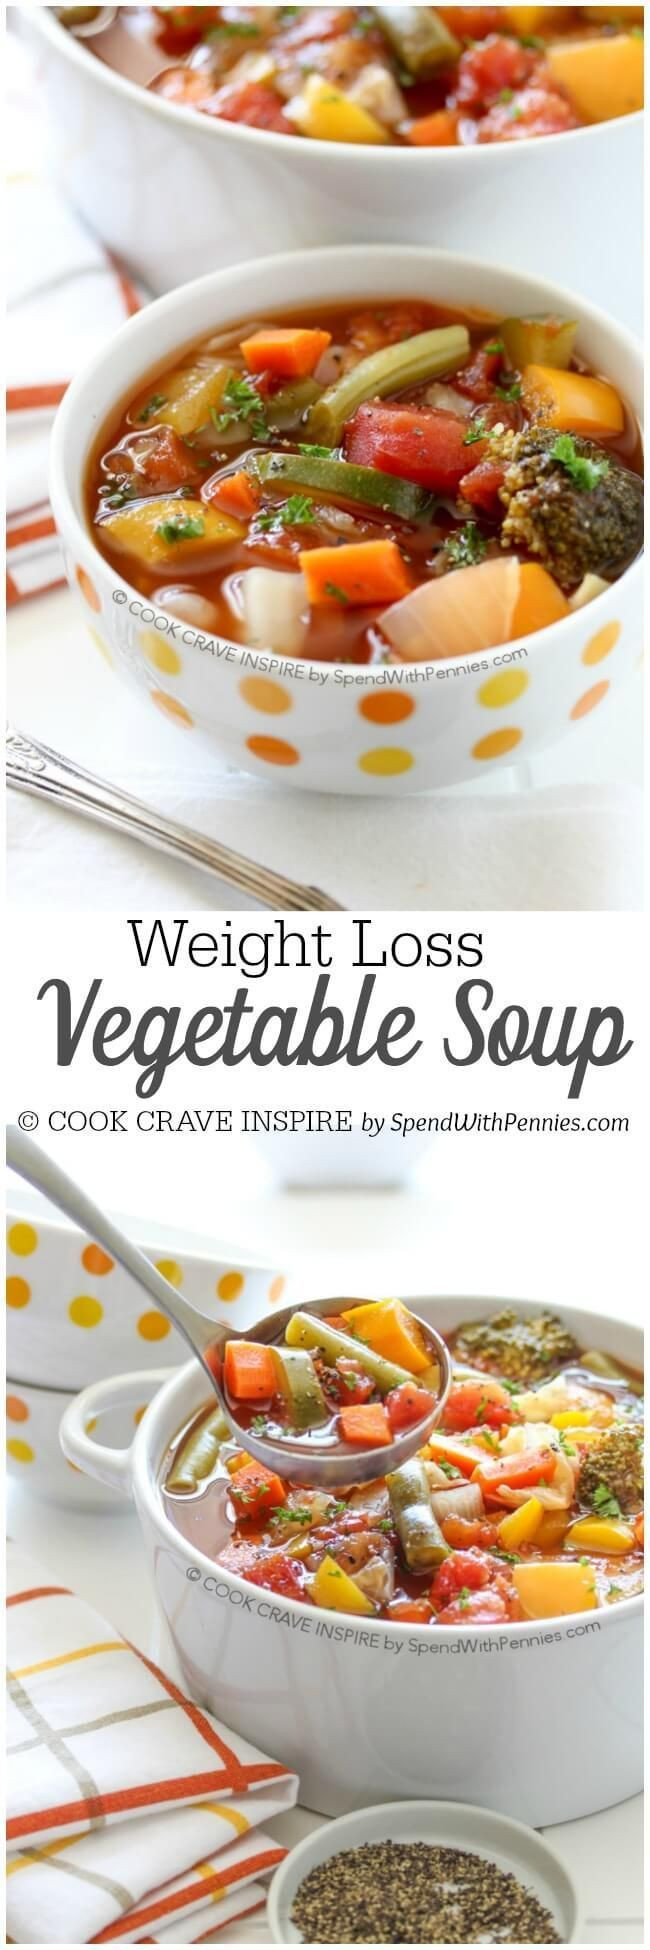 Low Calorie Vegetarian Recipes For Weight Loss
 This Weight Loss Ve able Soup Recipe is one of our